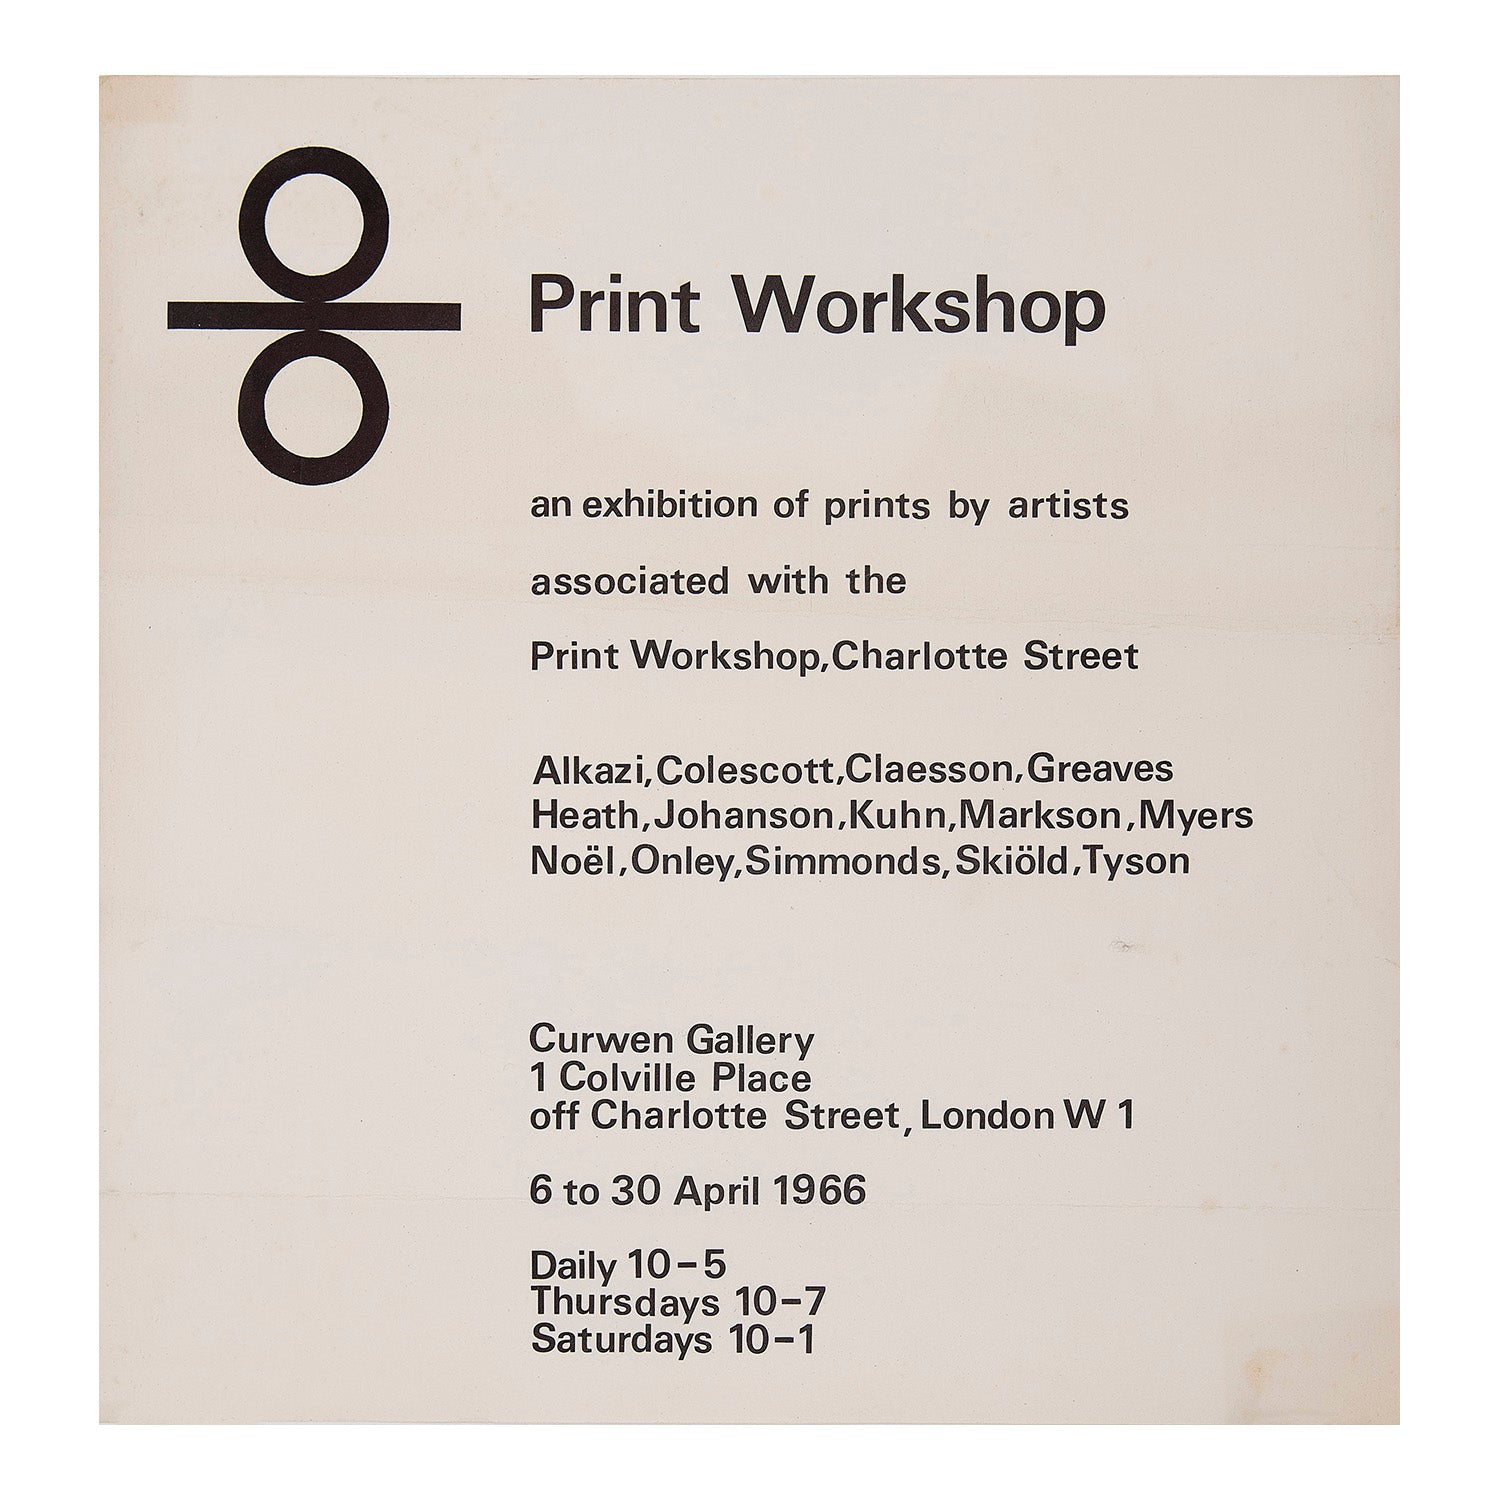 exhibition poster, Print Workshop. An exhibition of prints by artists associated with the Print Workshop, Charlotte Street, Curwen Gallery, 1966. The exhibition included works by Ebrahim Alkazi, Robert Colescott, Claesson, Greaves, Heath, Johanson, Kuhn, Markson, Myers, Noel, Onley, Simmonds, Birgit Skiöld and Ian Tyson.